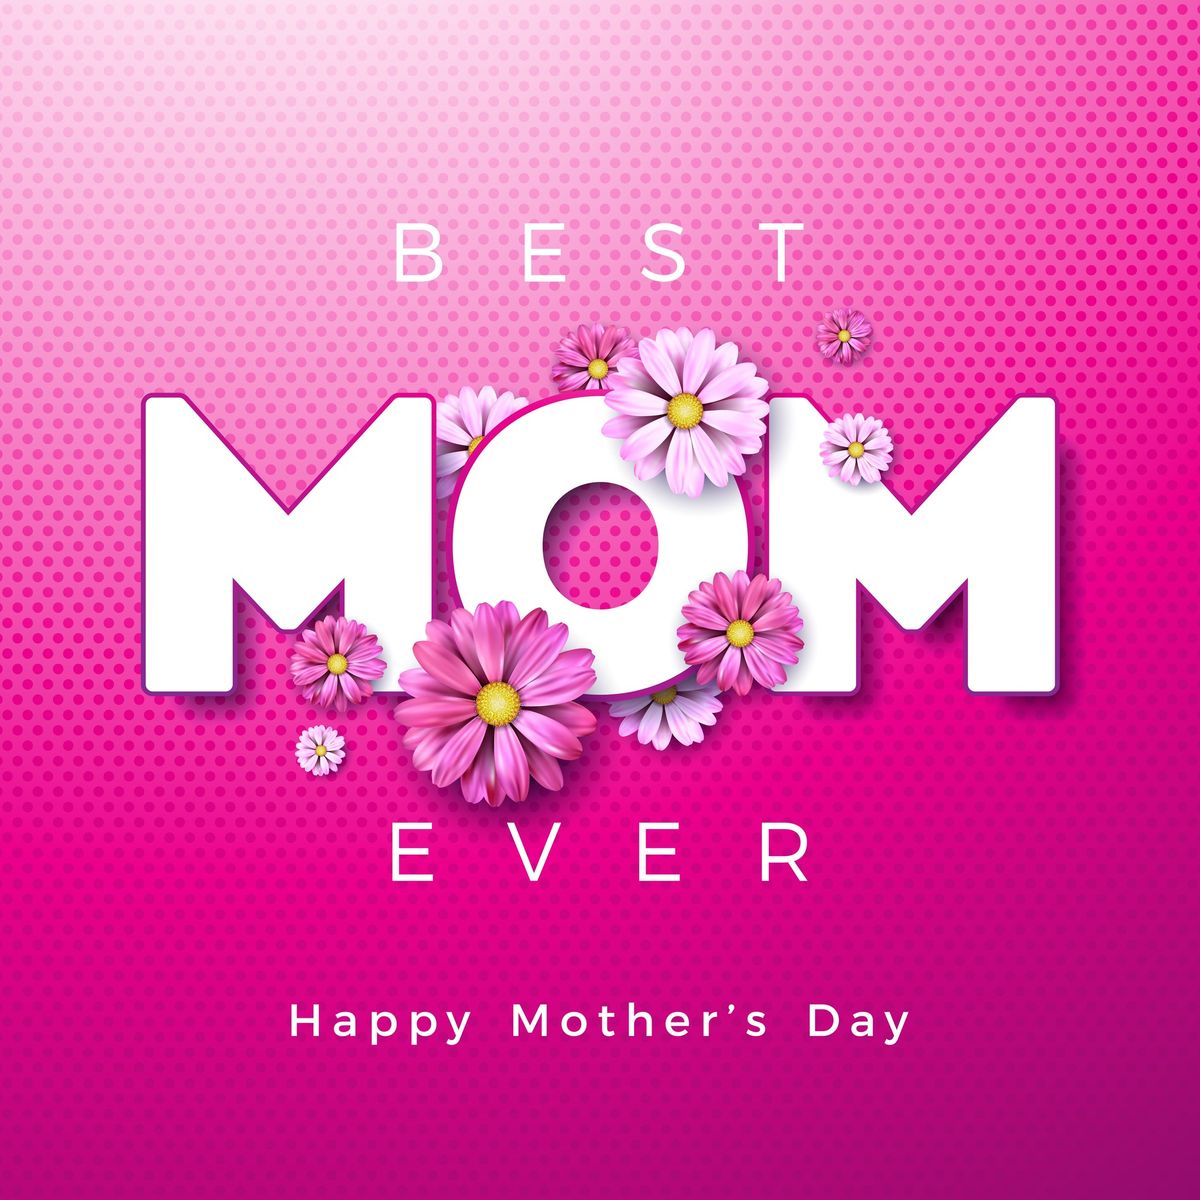 Happy Mothers Day Sales!